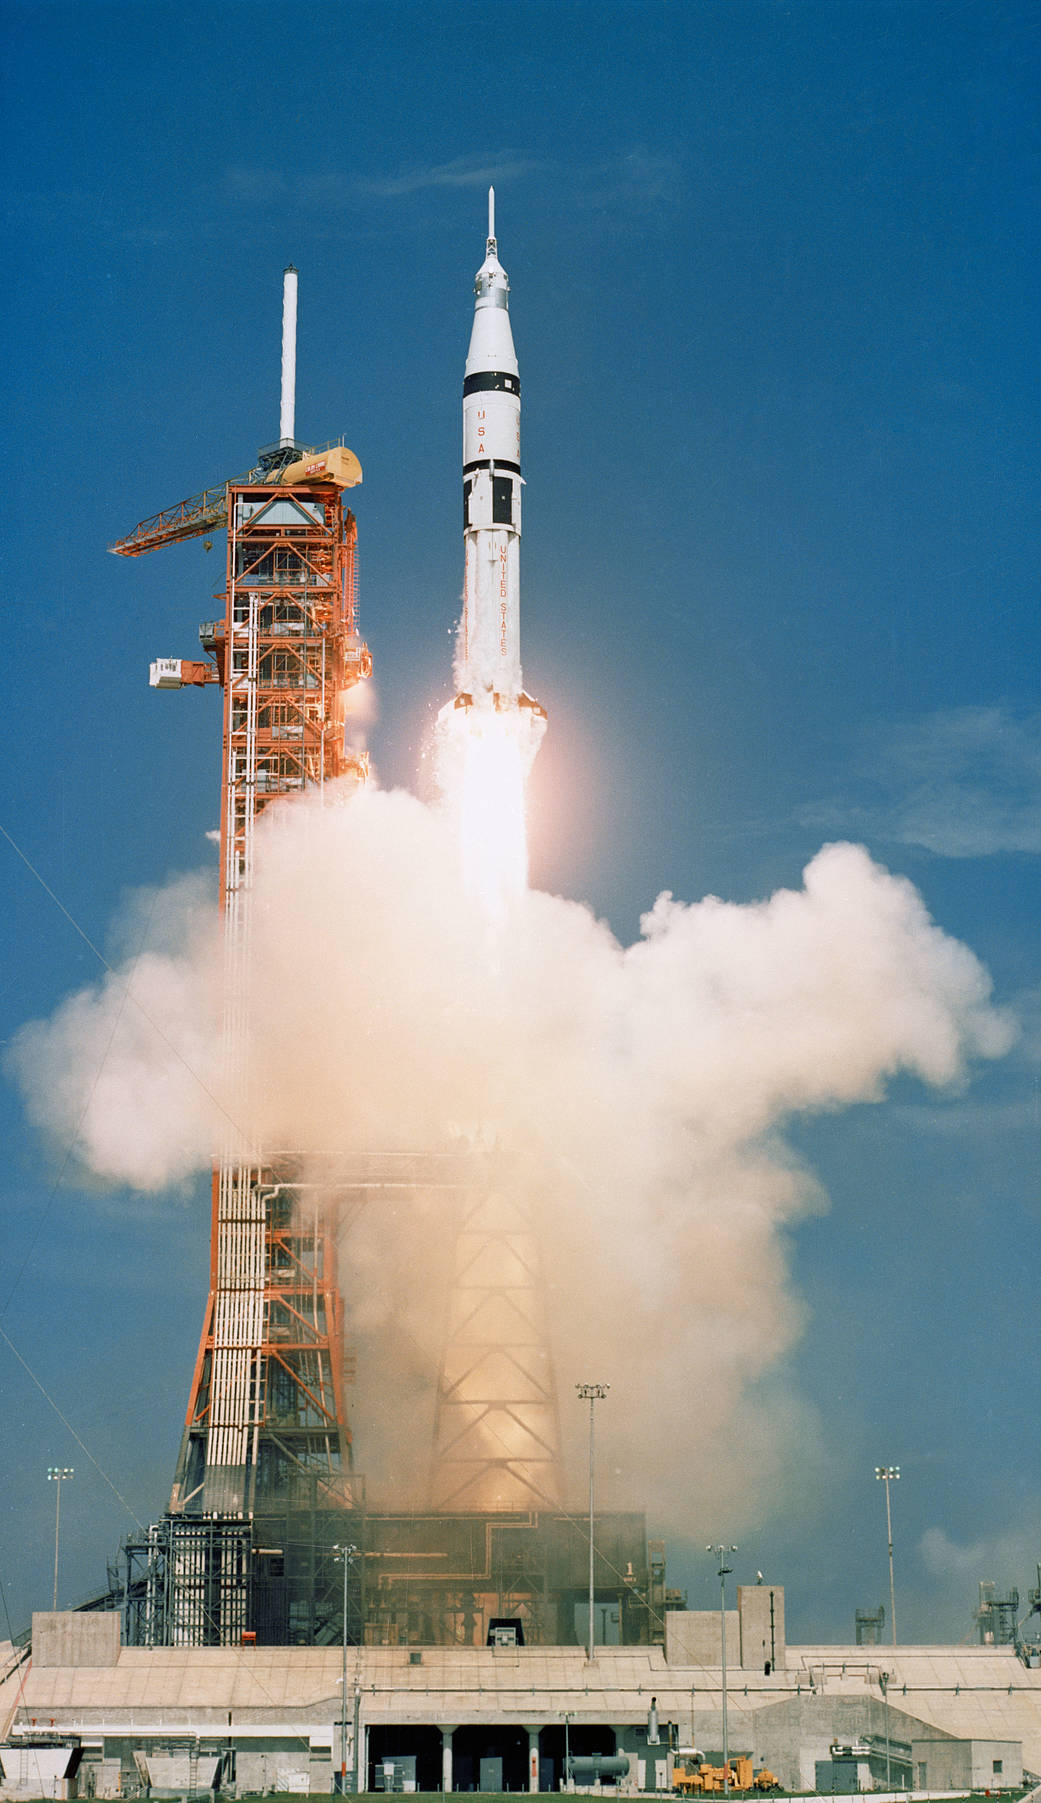 The final Saturn IB rocket launched from NASA’s Kennedy Space Center for the Apollo-Soyuz Test Project.